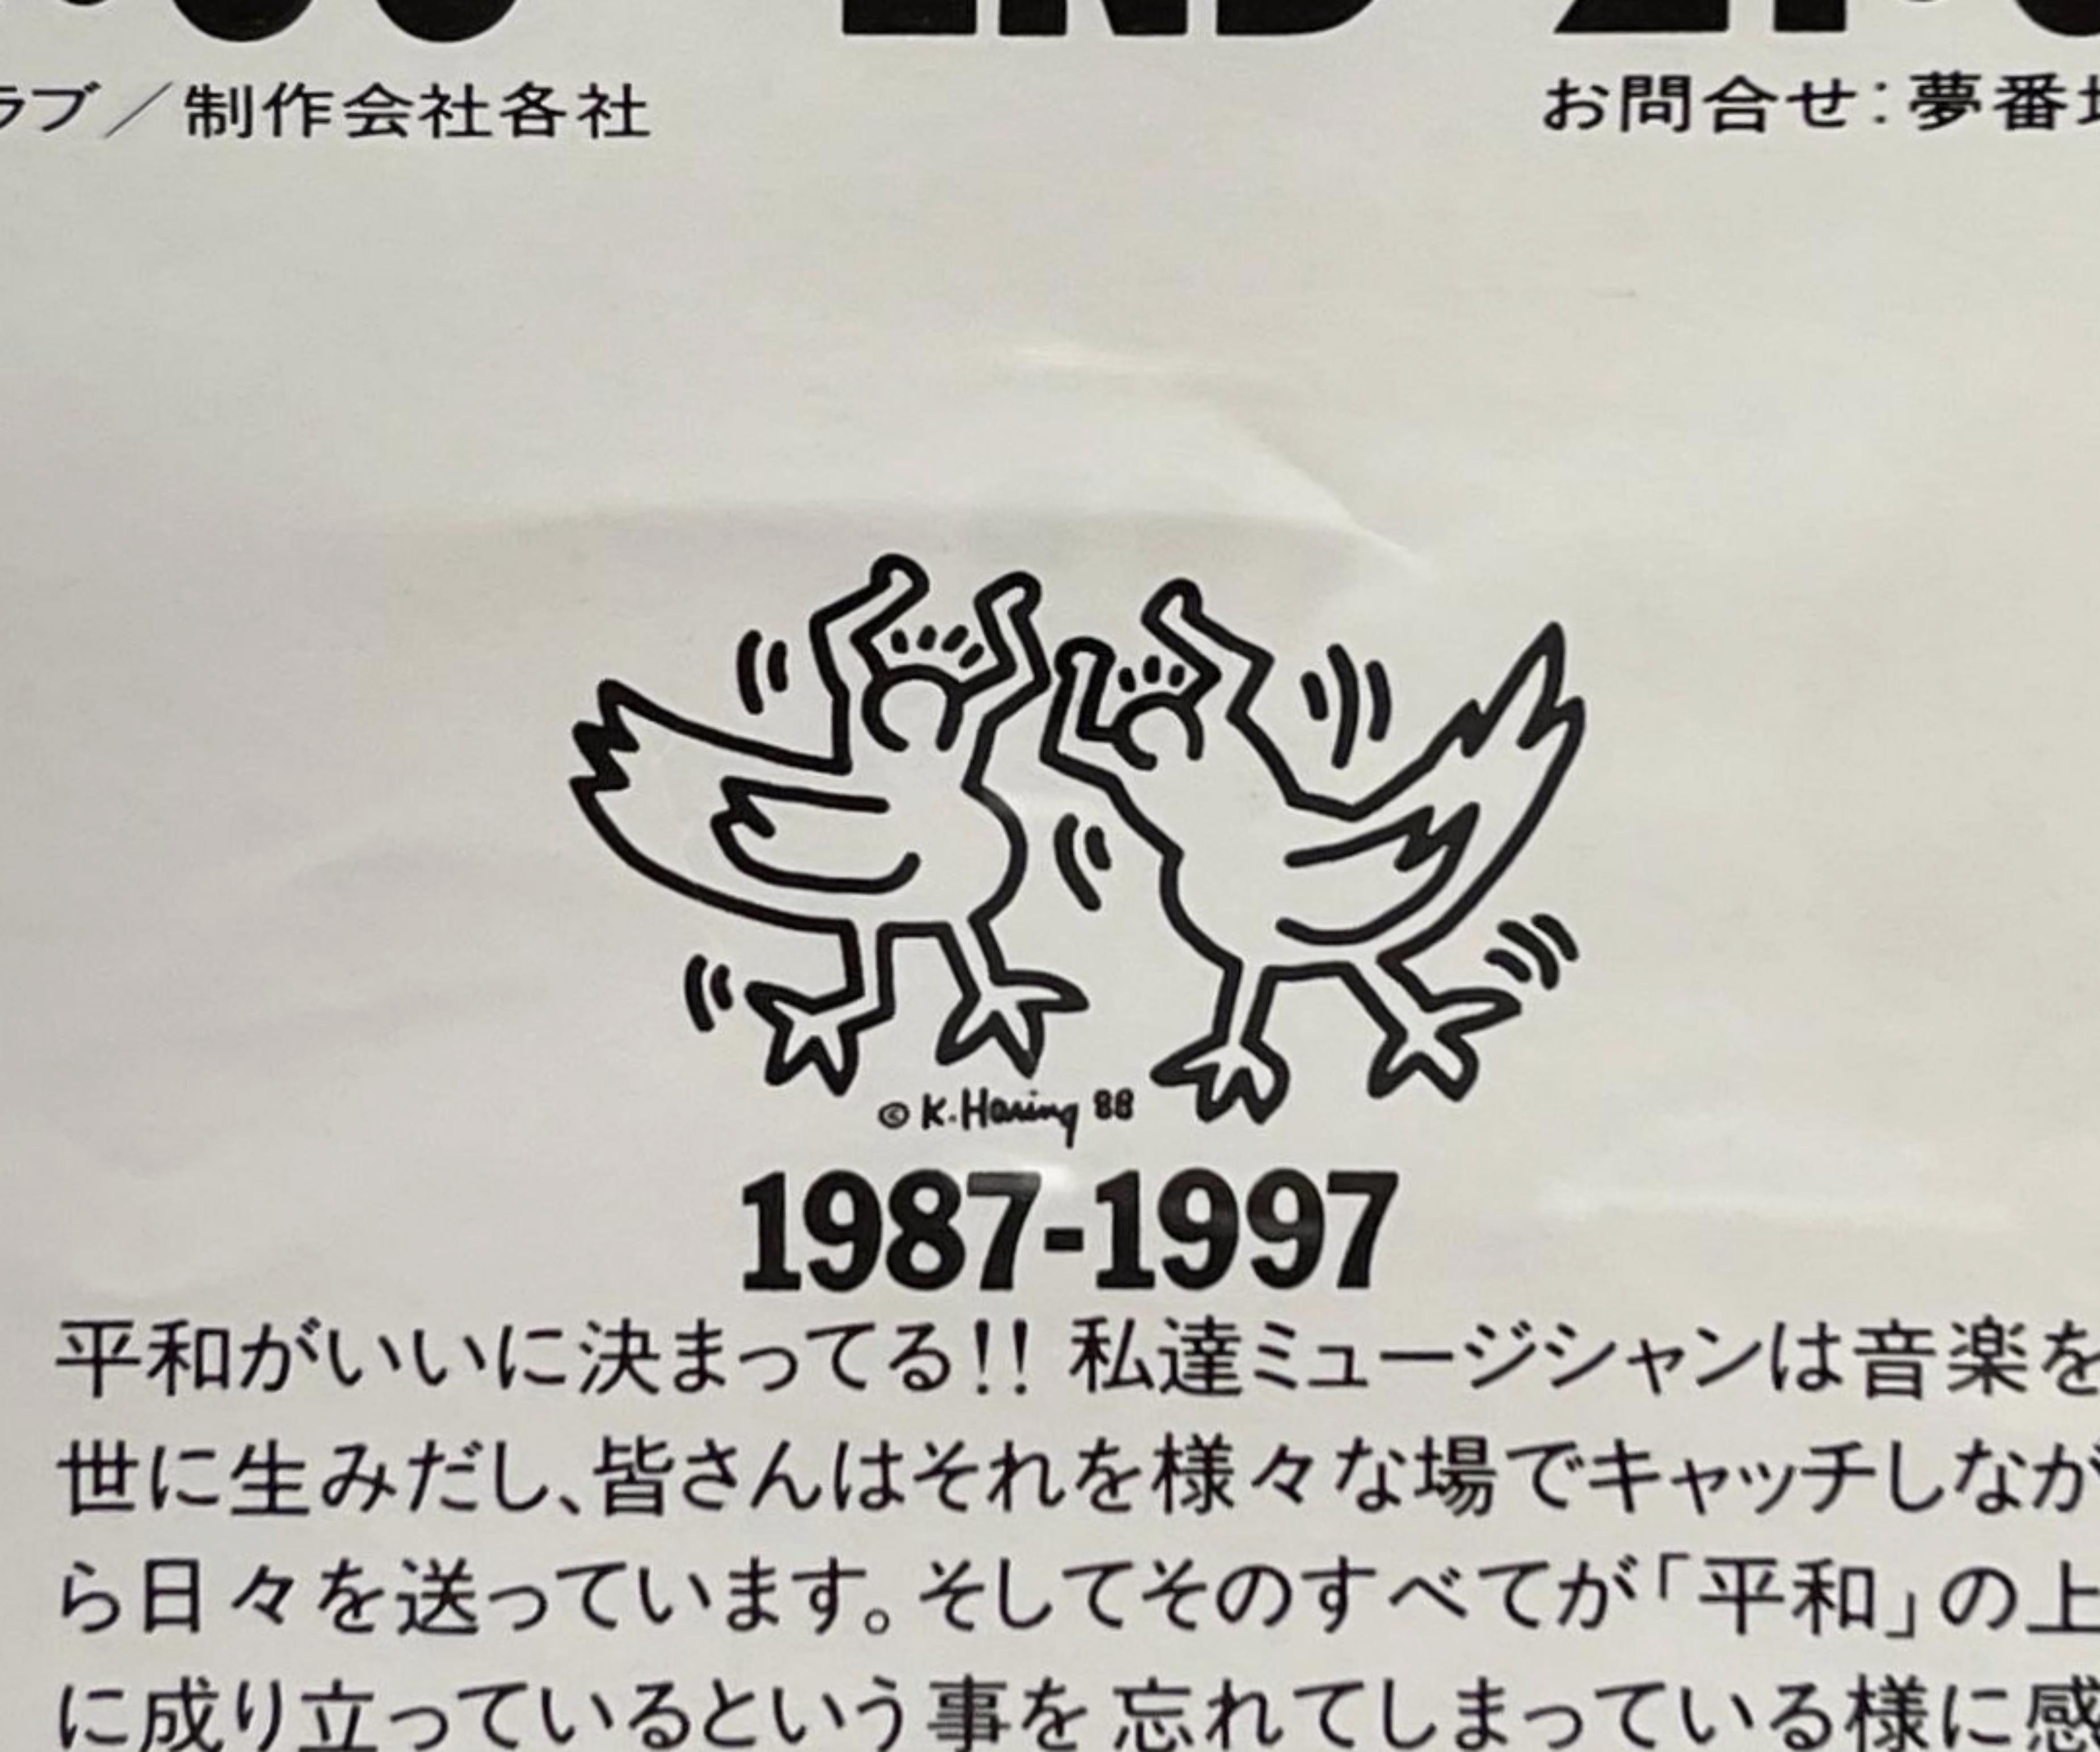 Rare Hiroshima Peace Celebration signed poster (hand signed by Keith Haring)  For Sale 8